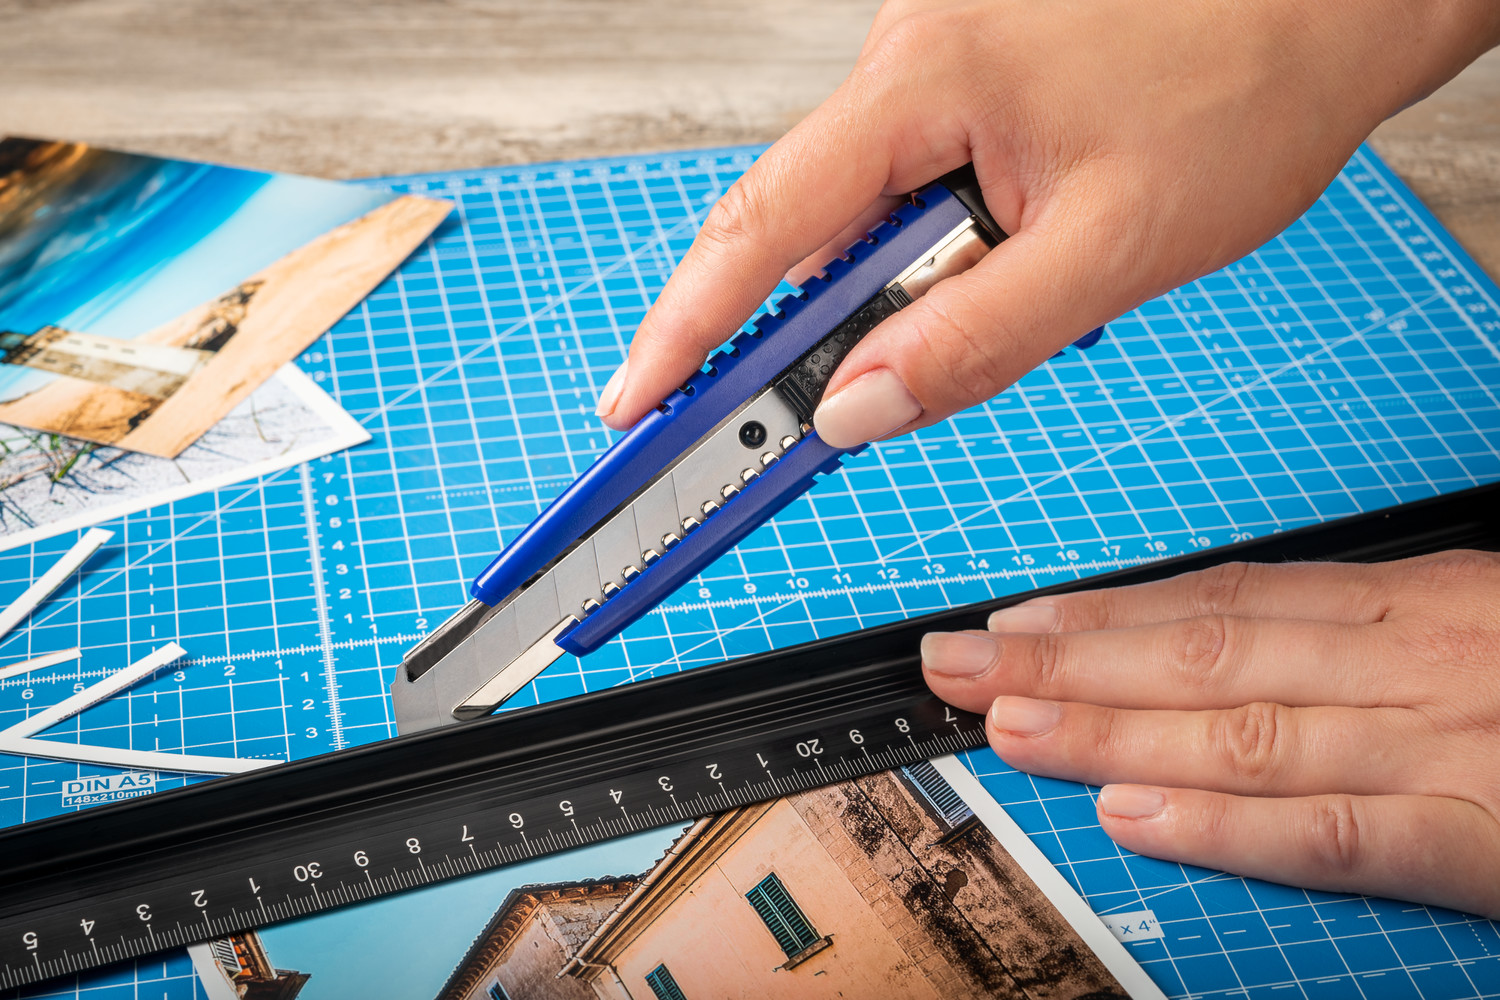 Universal use: DAHLE Basic cutters are ideal for household use, home improvement or your next DIY project